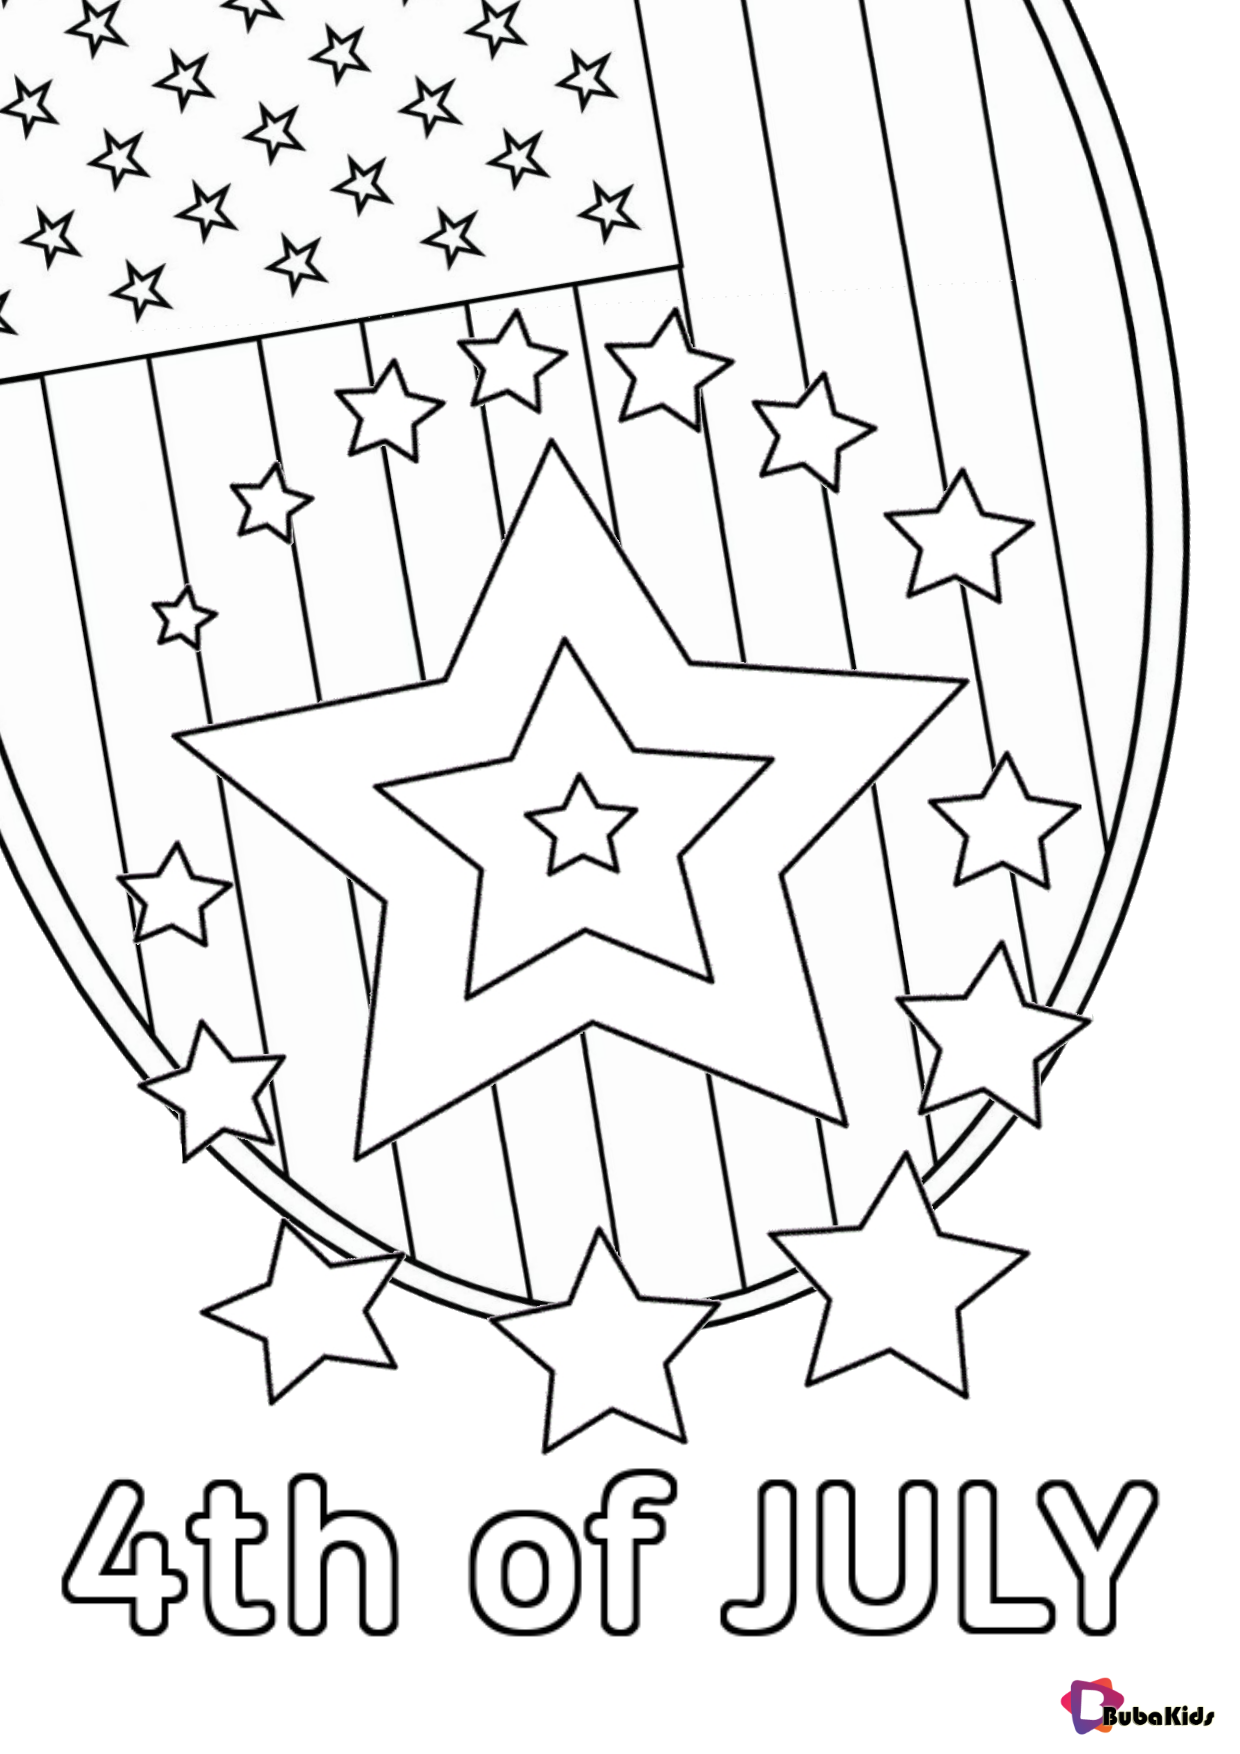 US independence day 4th of july coloring page Wallpaper